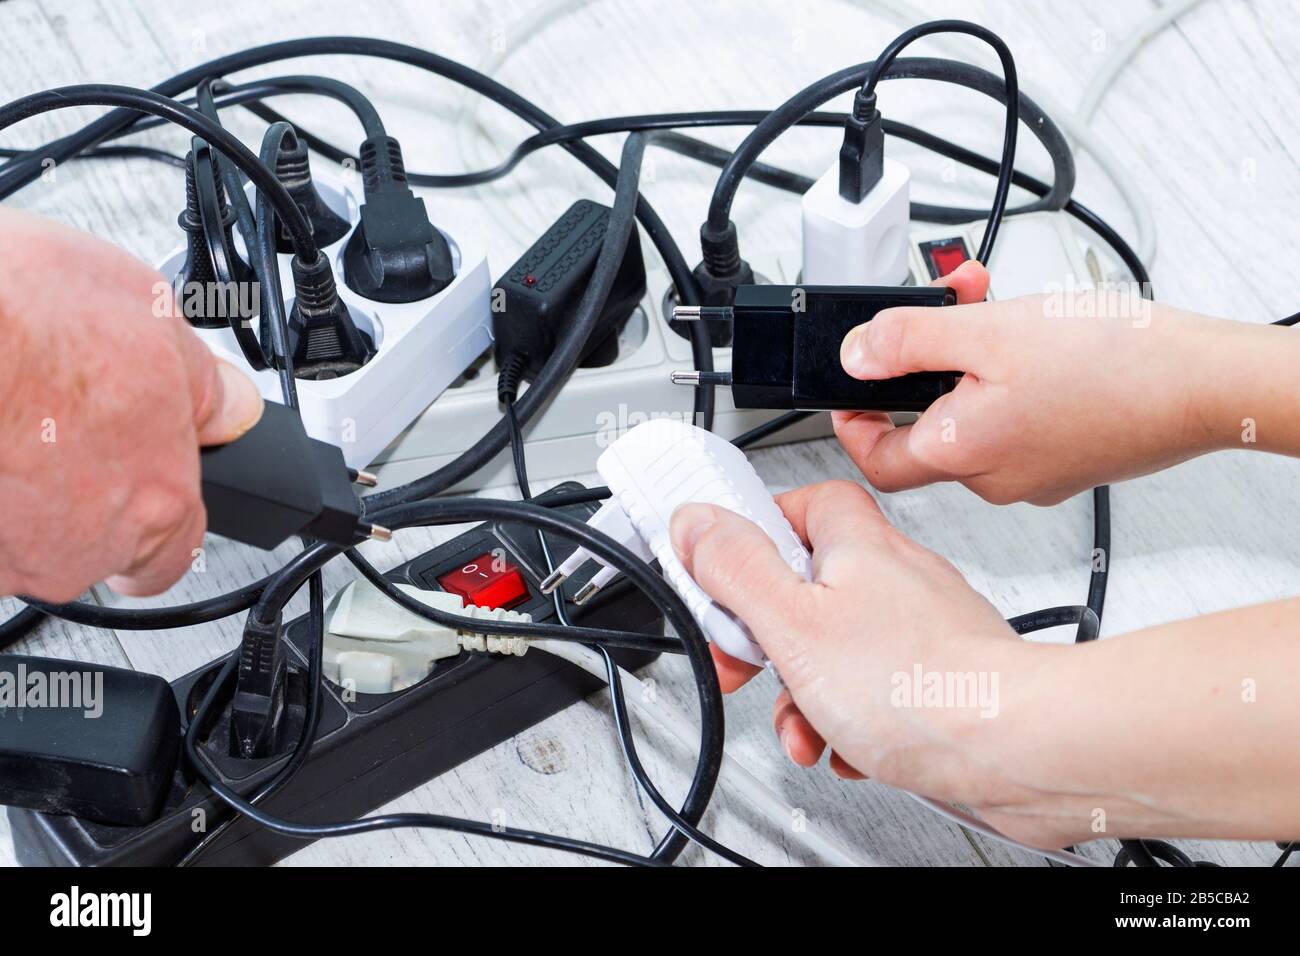 Lots of electrical outlets-enabled devices. Power saving. Stock Photo